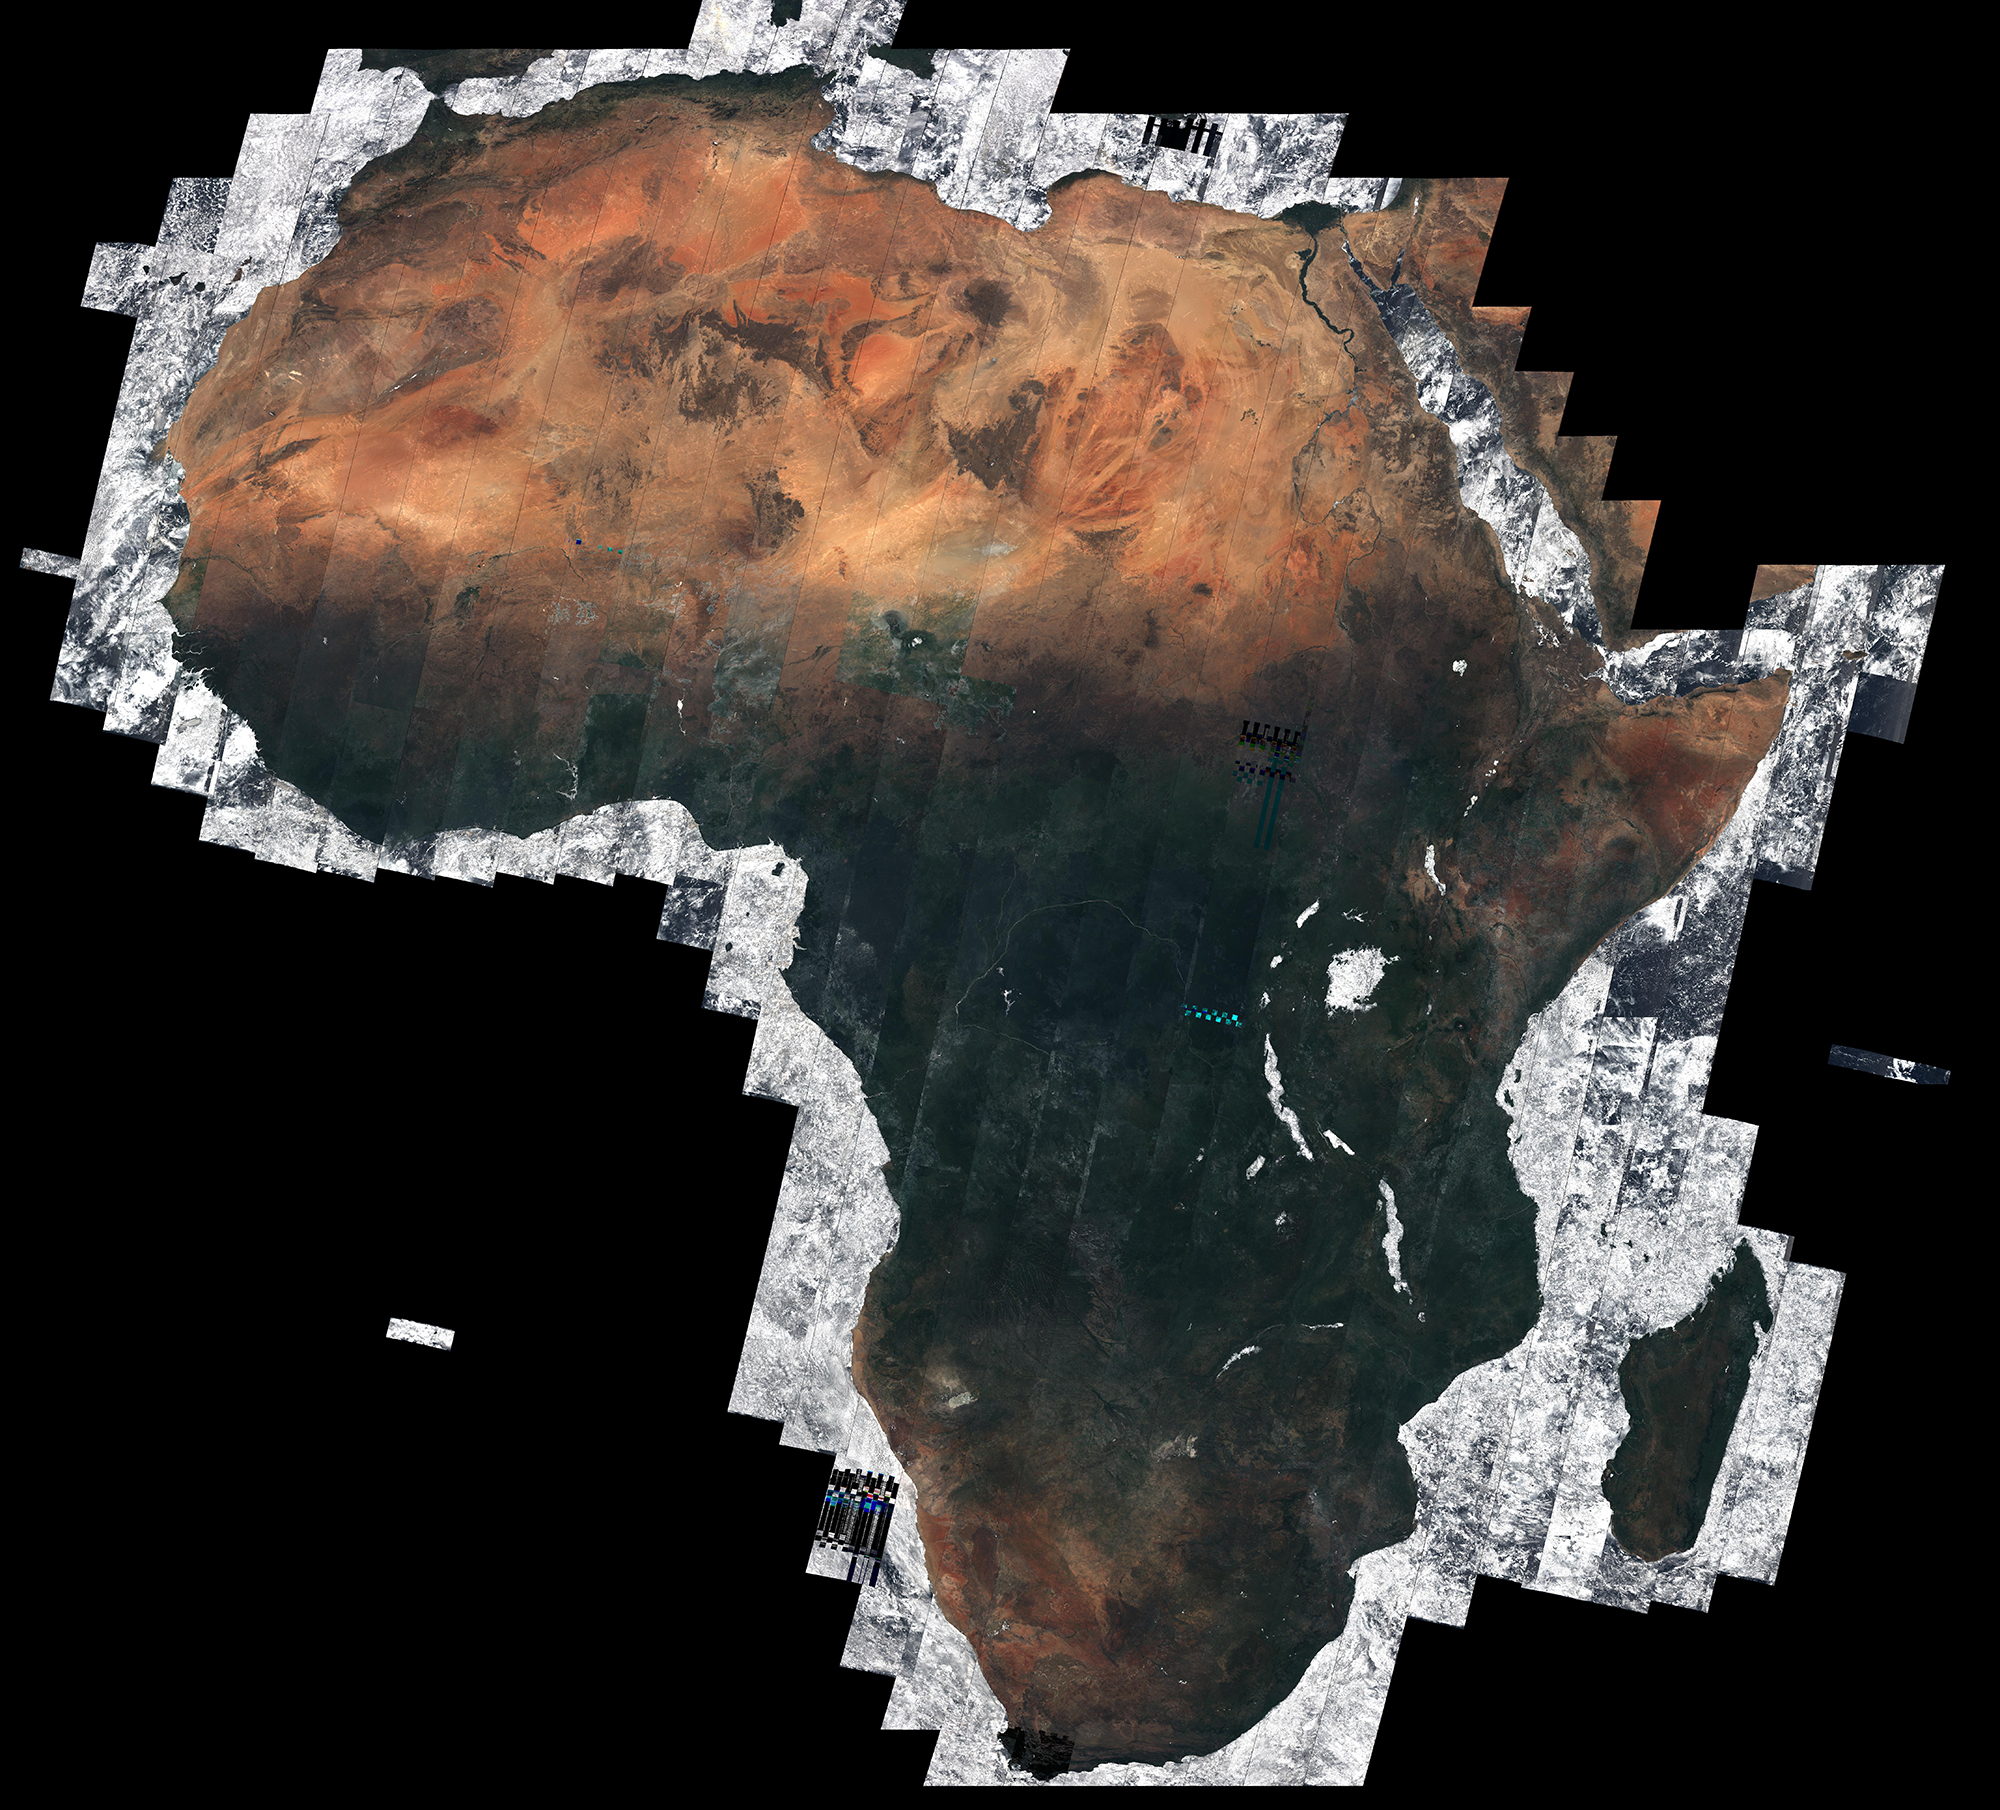 Using almost 7000 images captured by the Sentinel-2A satellite, this mosaic offers a cloud-free view of the African continent – about 20% of the total land area in the world. The majority of these separate images were taken between December 2015 and April 2016, totaling 32 TB of data. (Copernicus Sentinel/Brockmann Consult/Université catholique de Louvain/ESA)